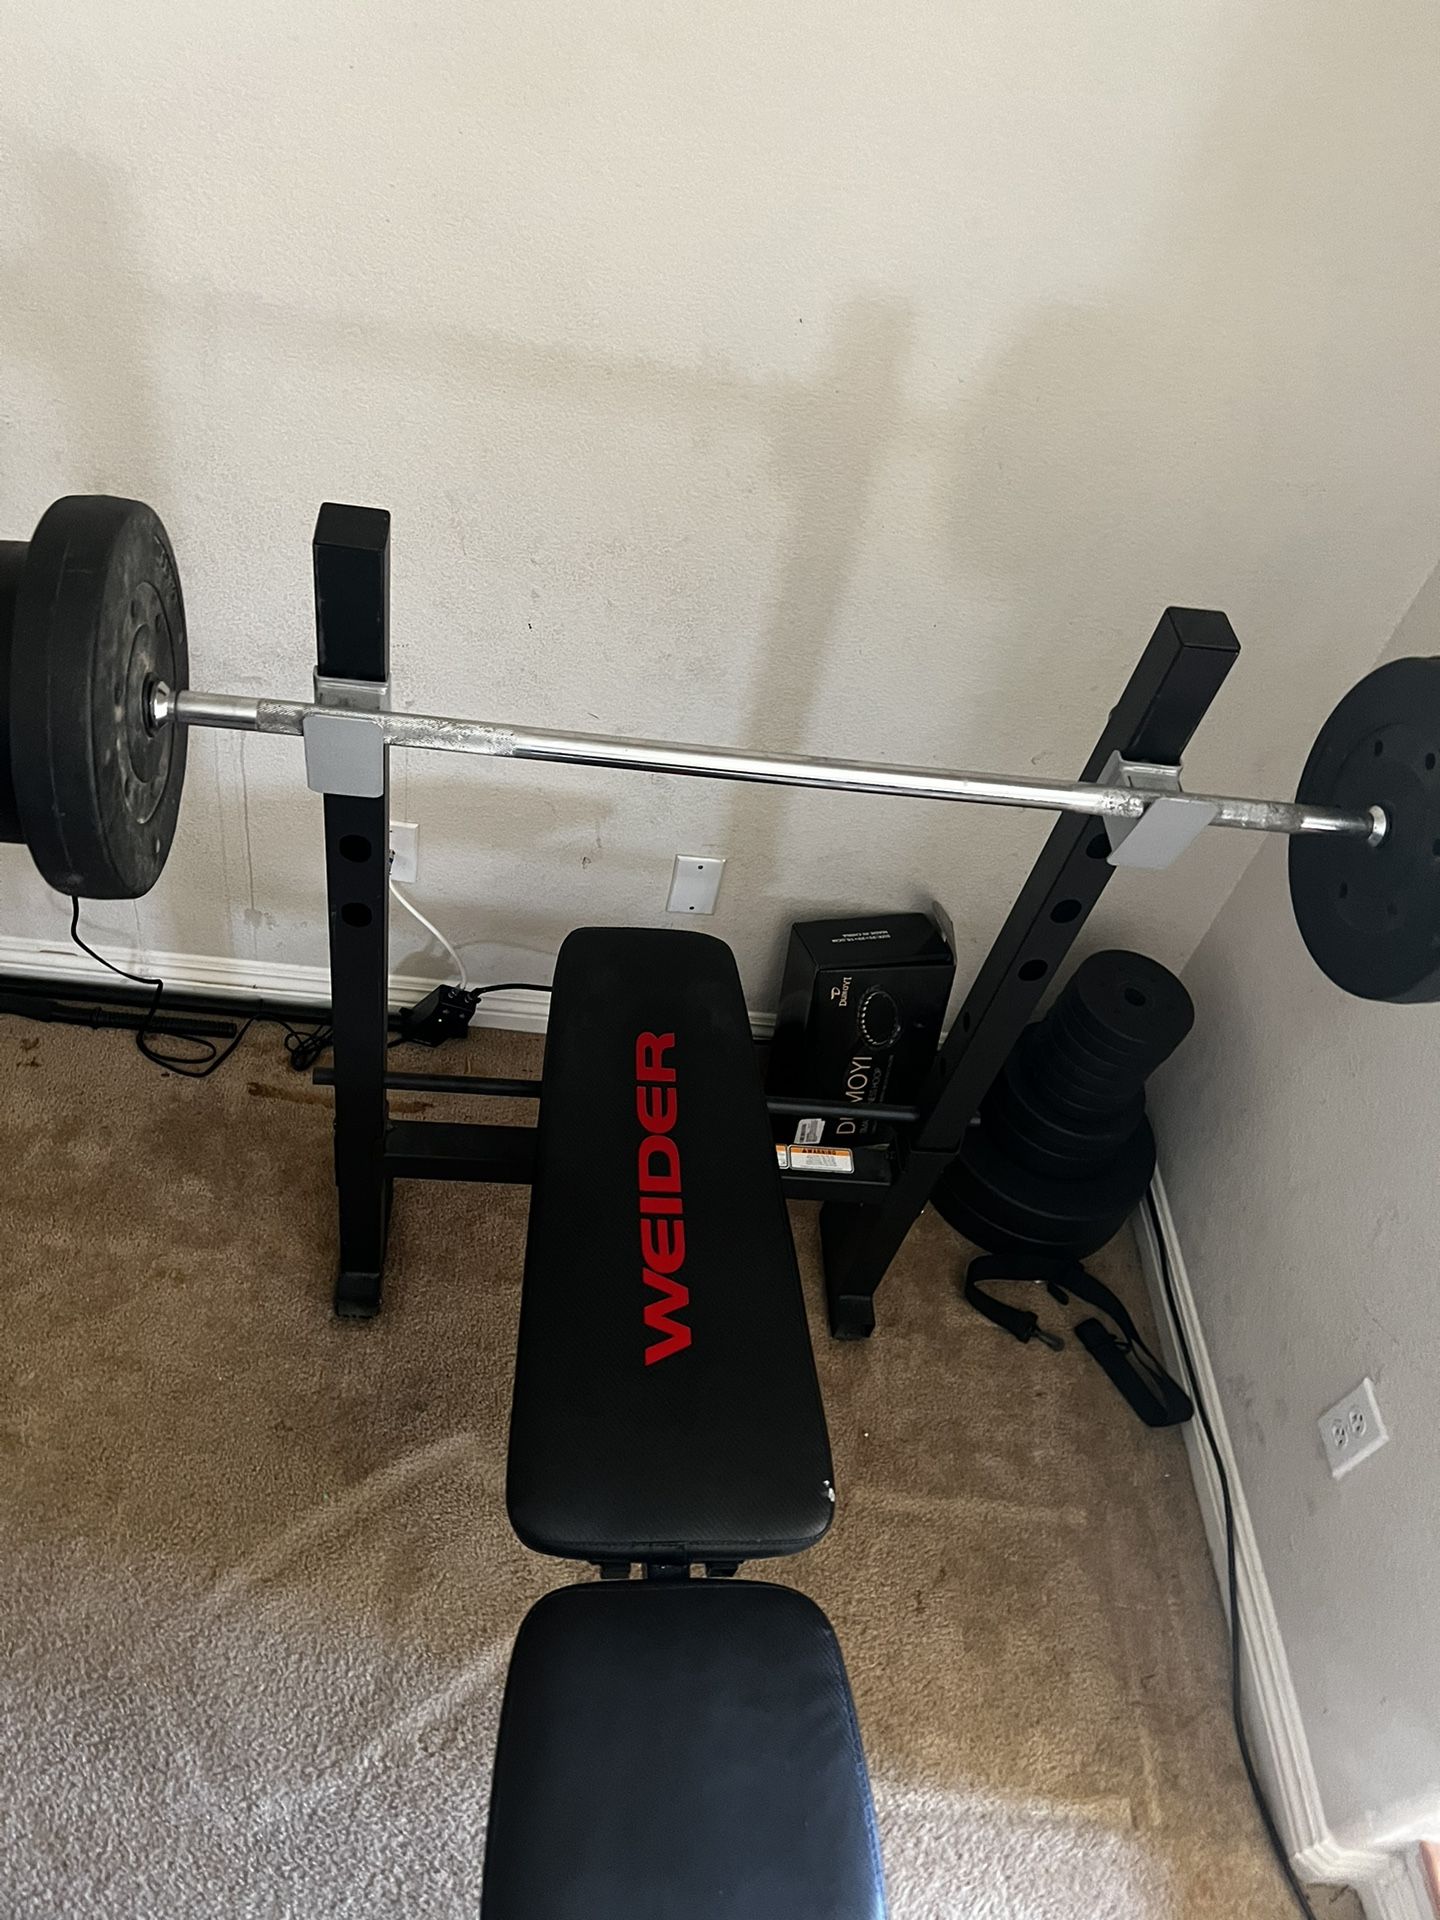 Bench press + 200 pounds in weight 